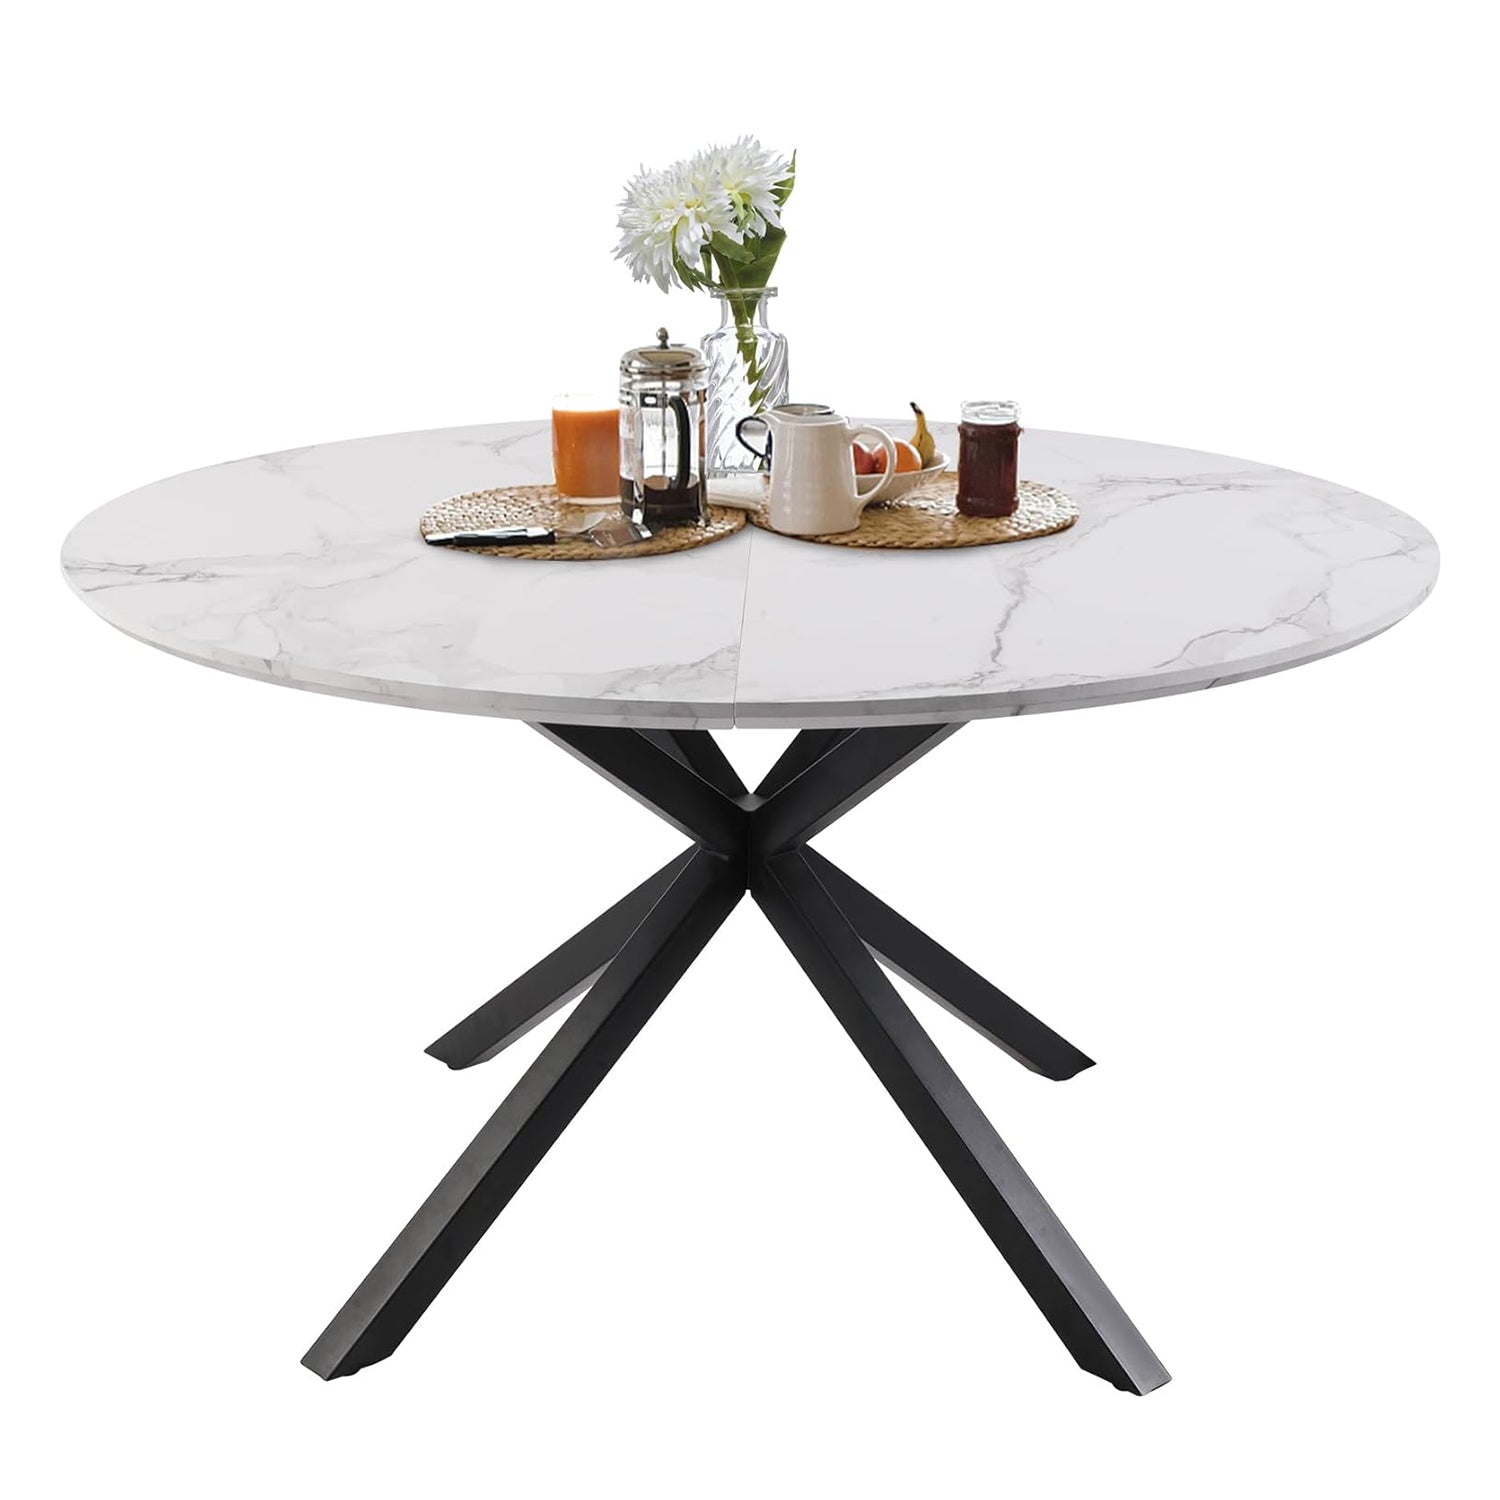 53" Mid-Century Modern Round Dining Room Table for 4-6 Person W/Solid Metal Legs, Marble Texture